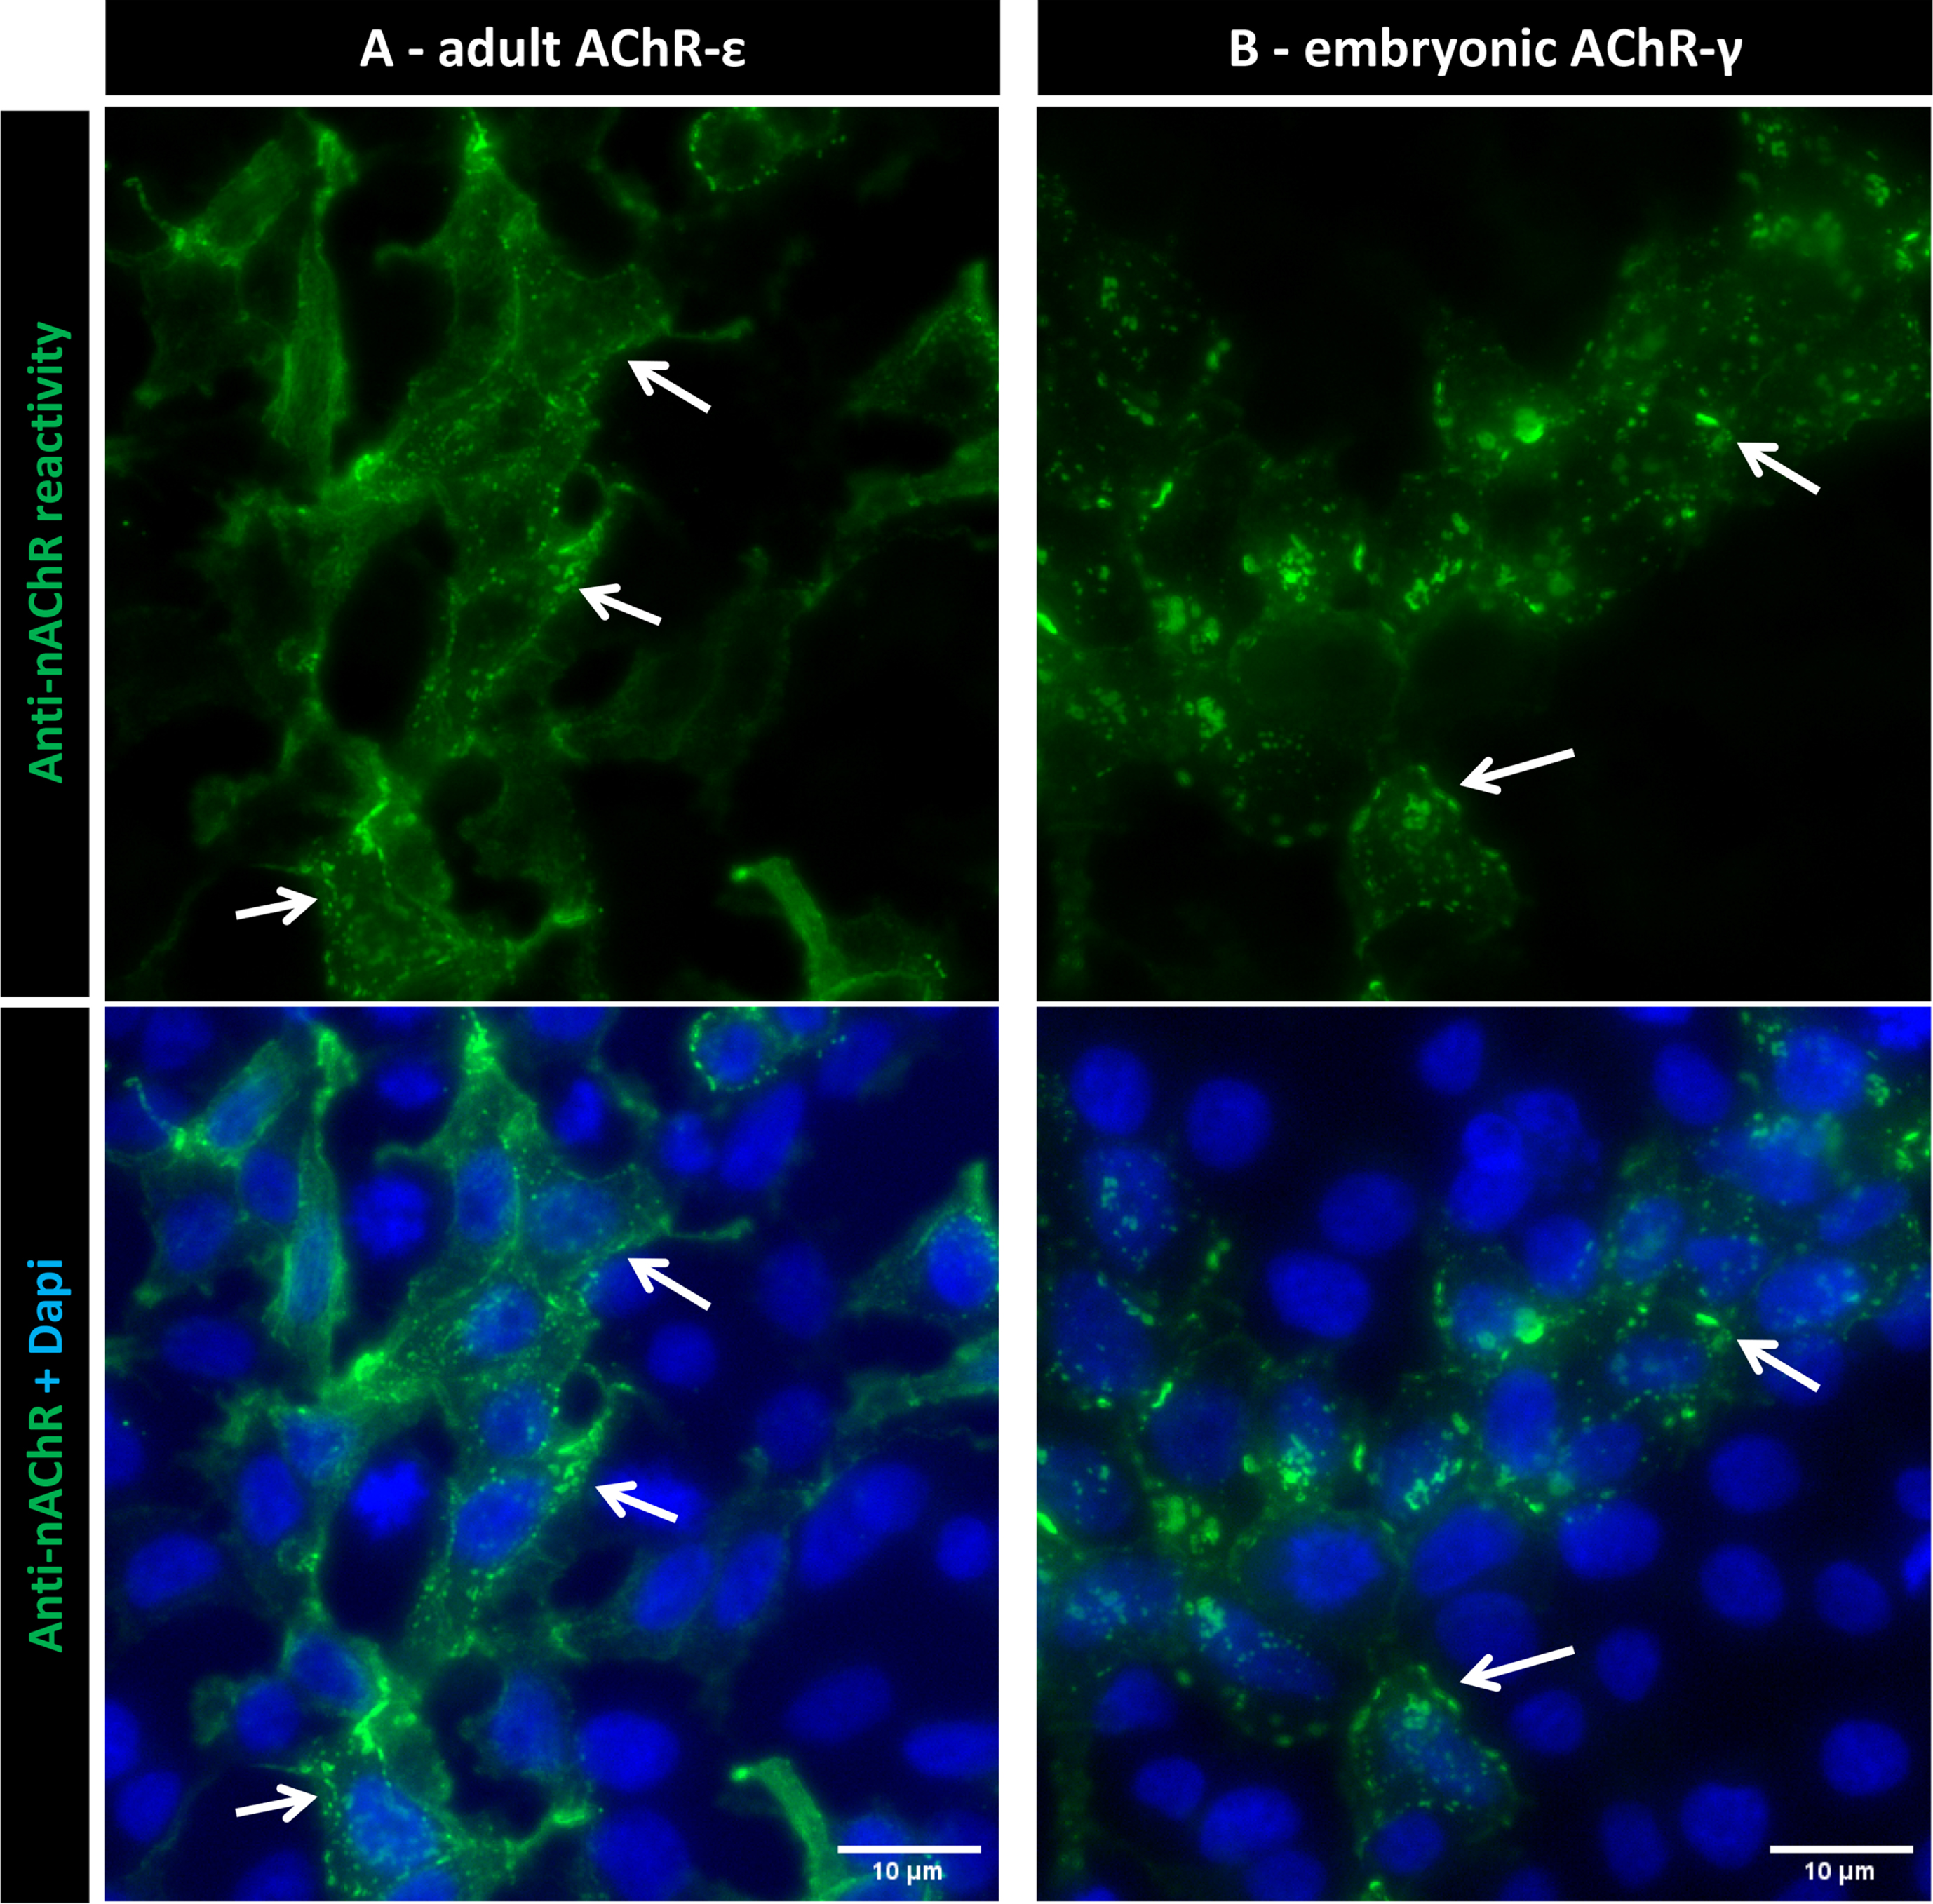 Anti-nAChR reactivity with Dapi counterstaining. Images from a representative positive sample indicating the localization of AChR clusters in the cytoplasmic membrane (arrows) in both adult (A) and embryonic (B) conformations. Scale bars = 10μm.